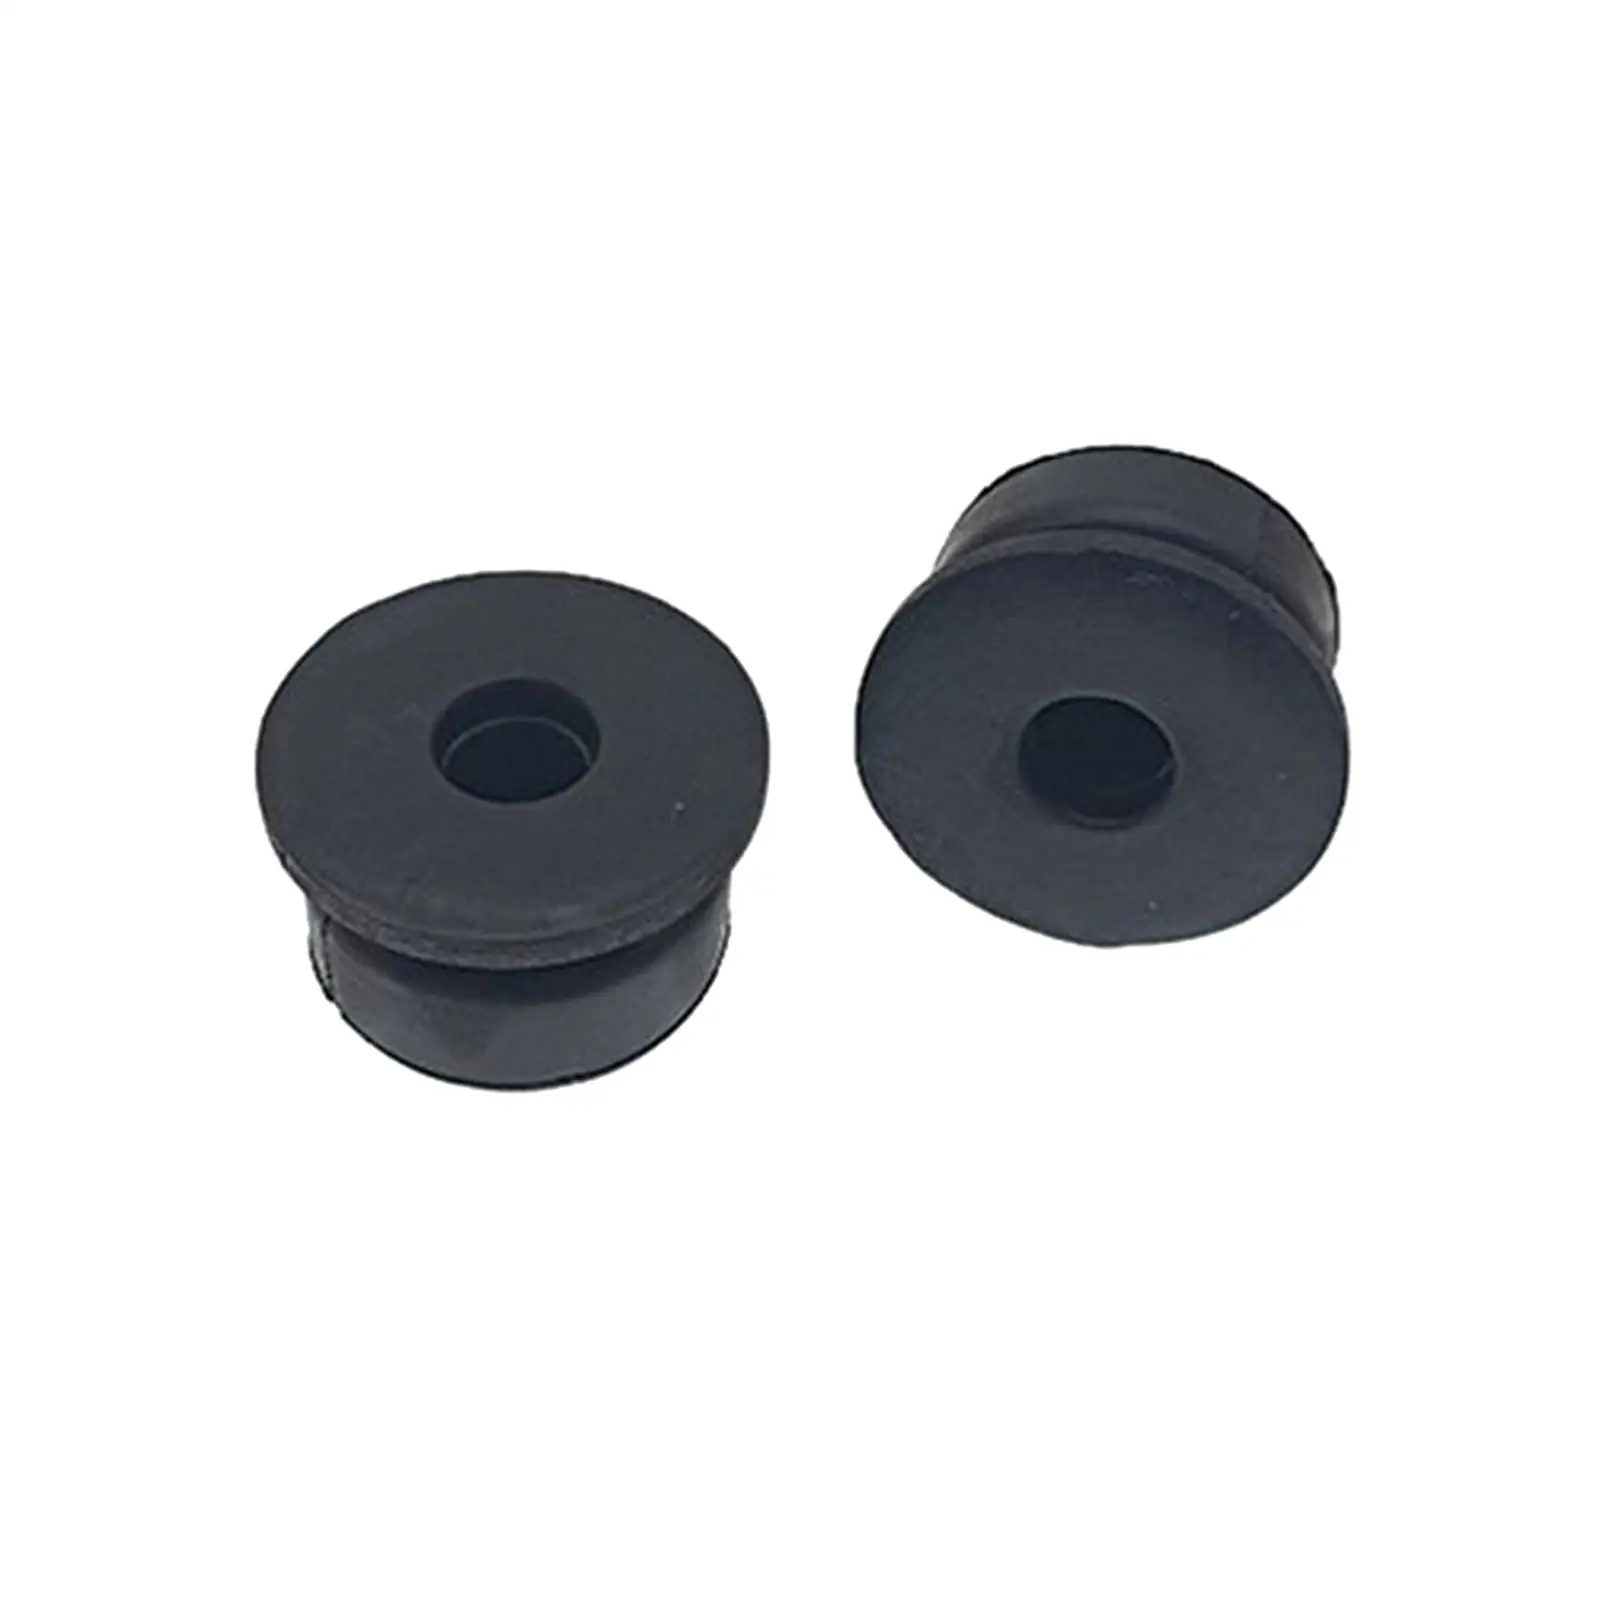 2 Pieces Radiator Cushion Replacement 74172-Sm4-000 Accessory Rubber Cushion Bushing for Honda Cr-V Accord Civic Acura